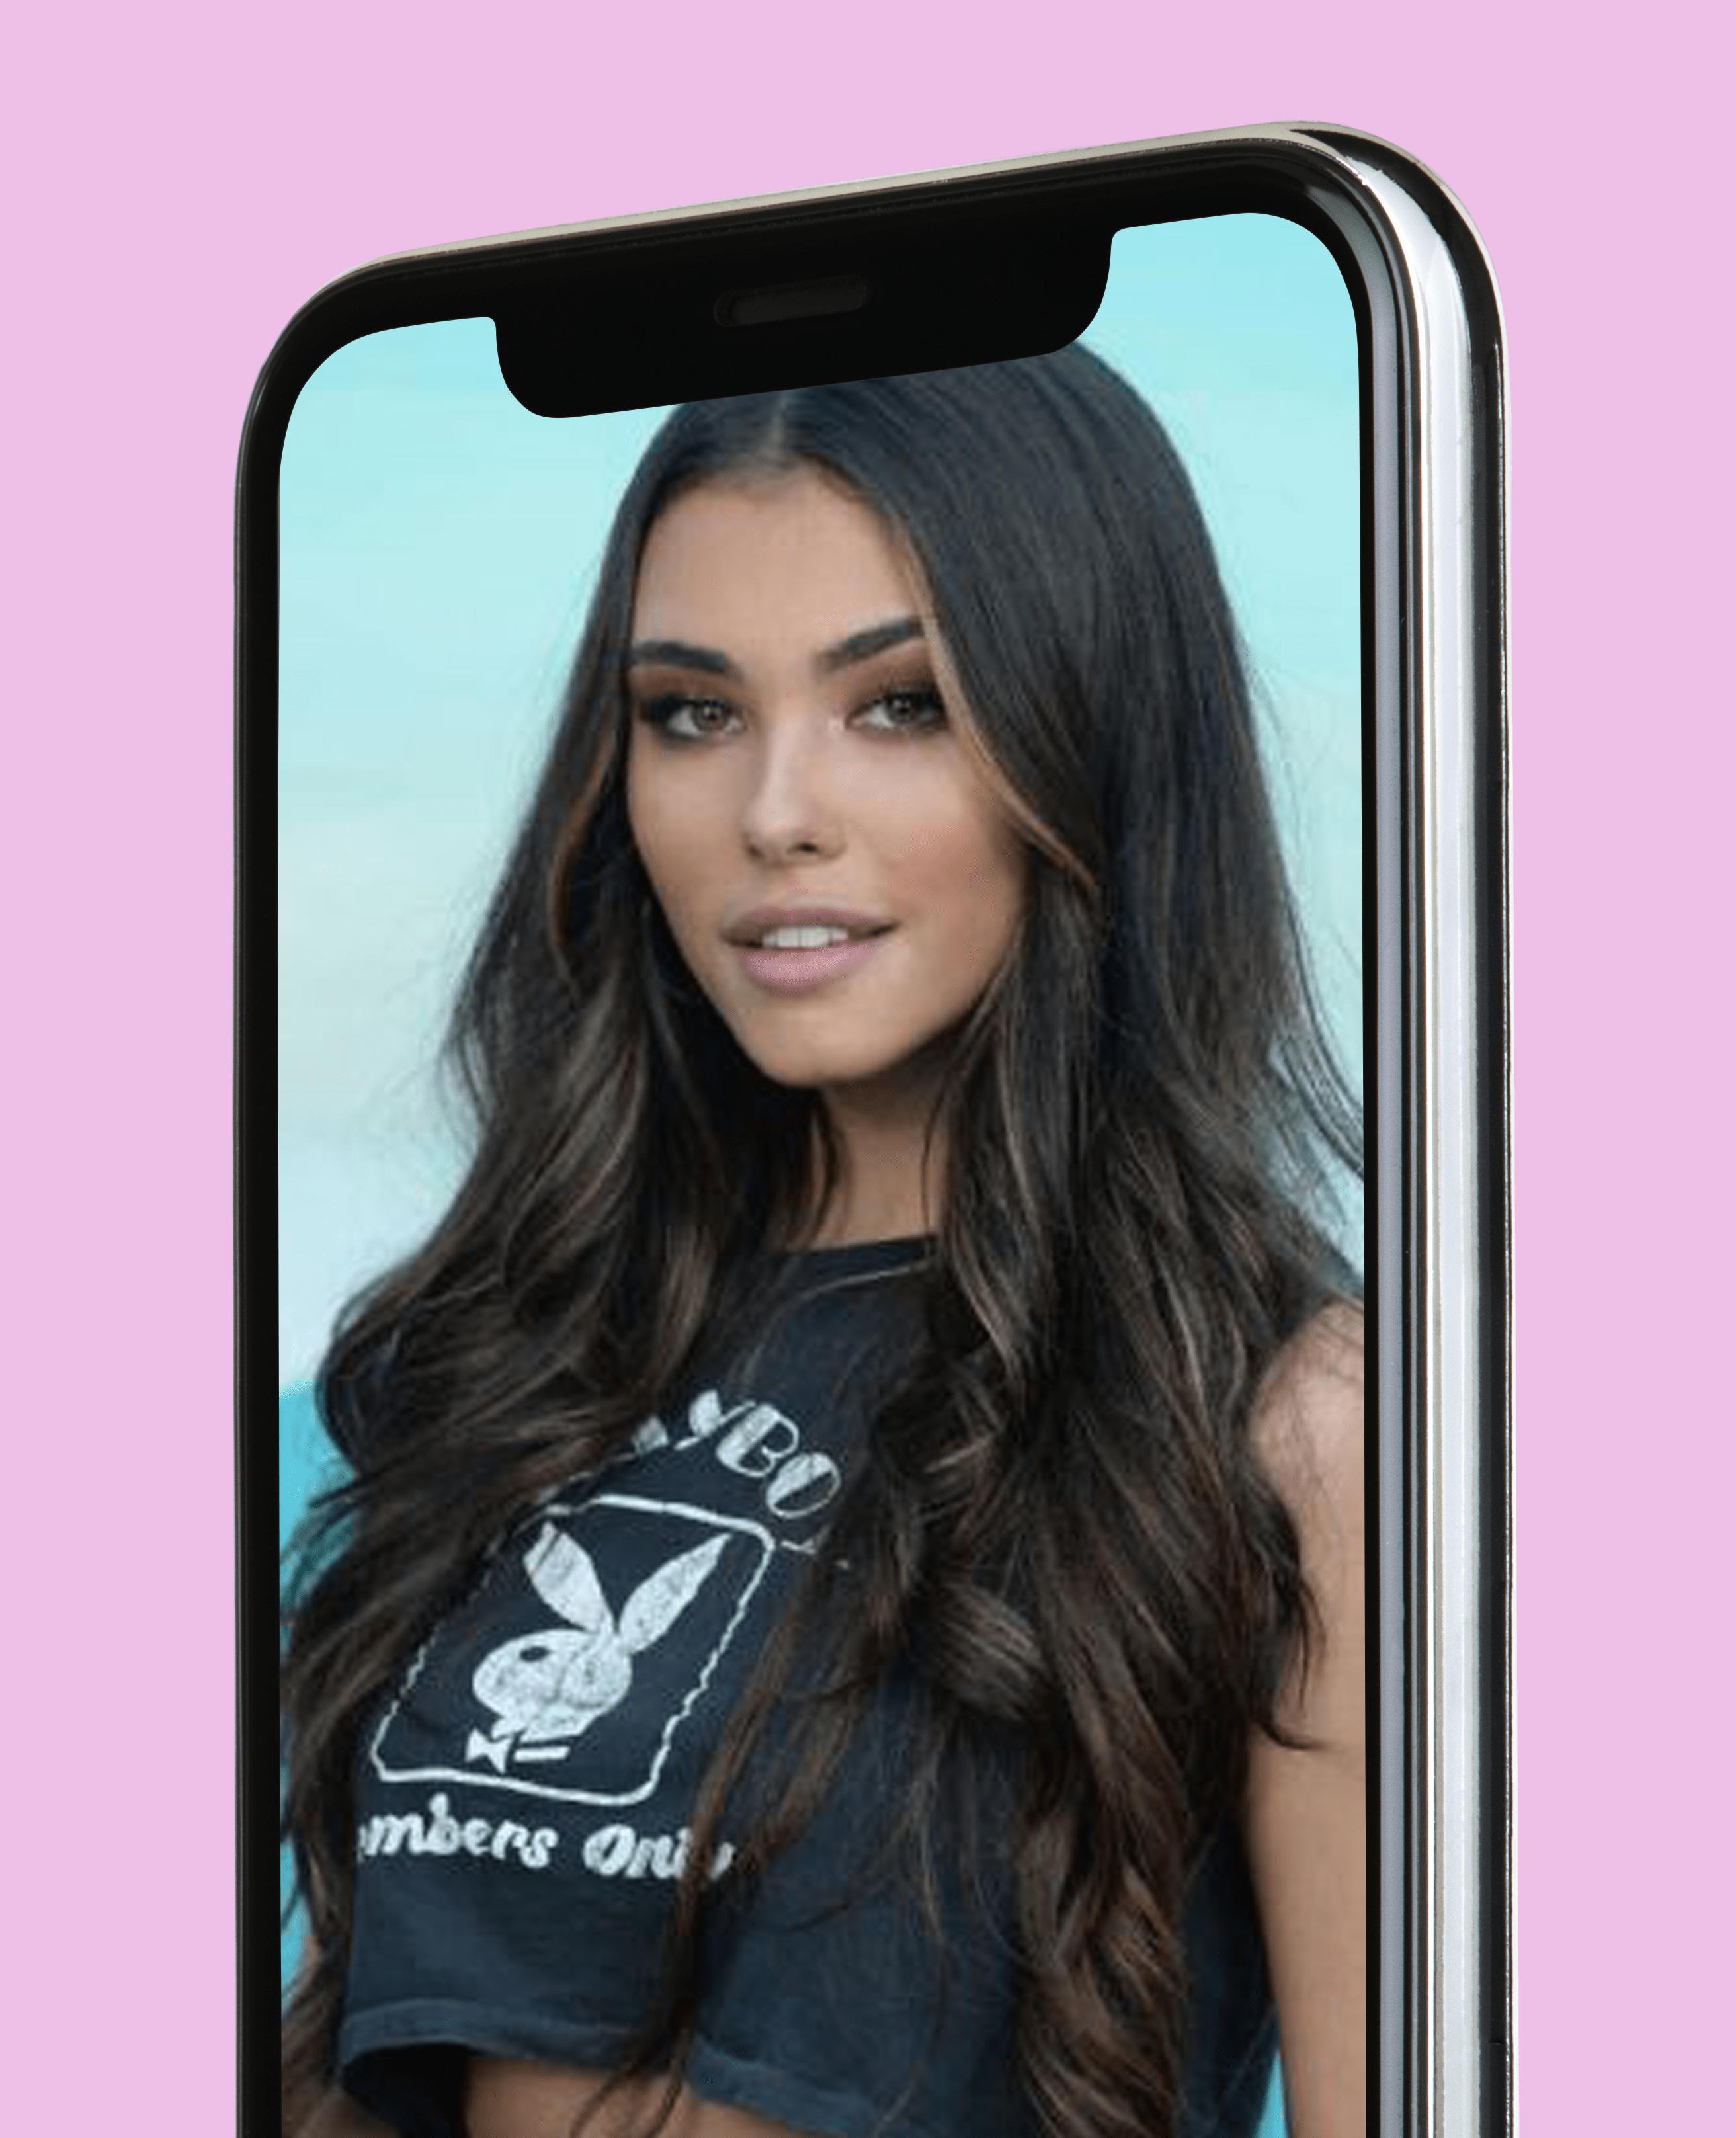 Madison Beer 2020 Wallpapers